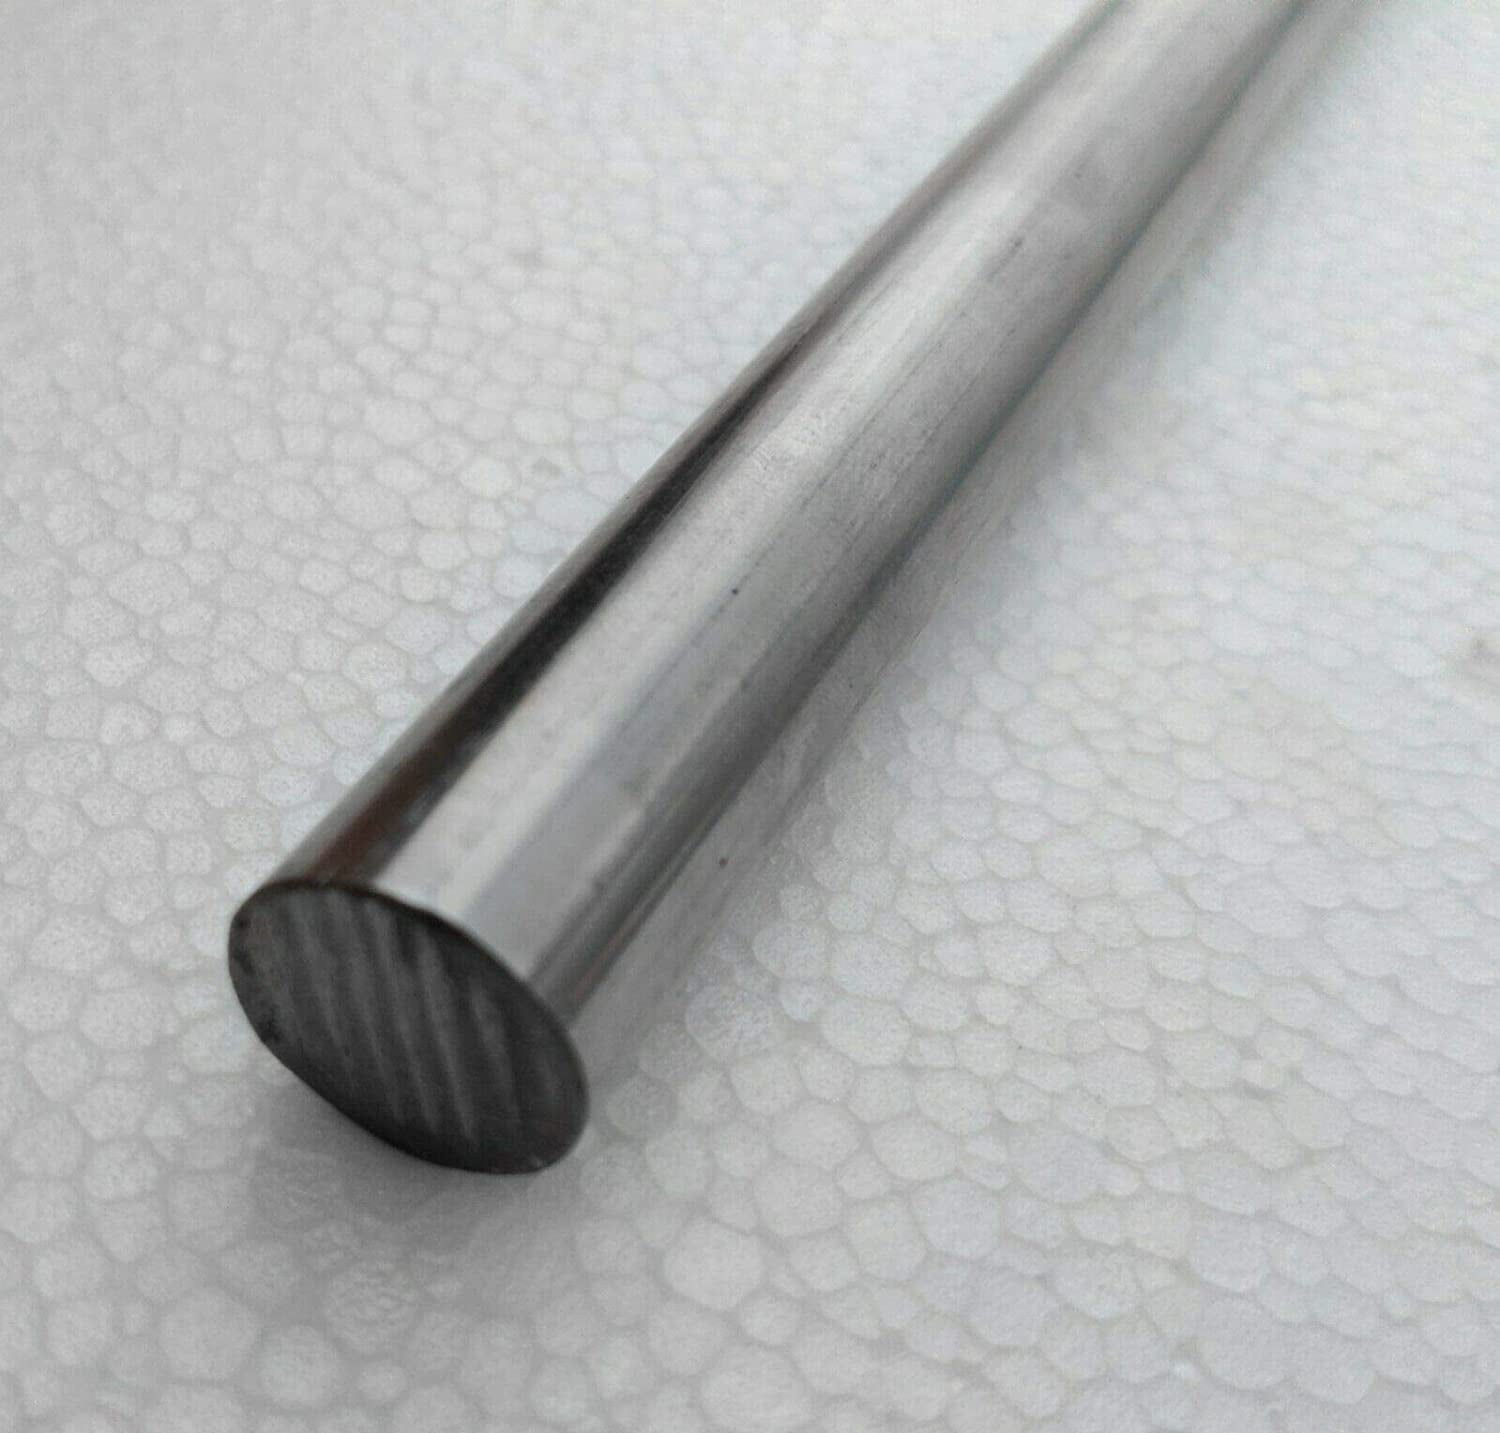 Grade 303/304 Length; 12" Details about   Stainless steel solid round bar 1/8" -> 1" 